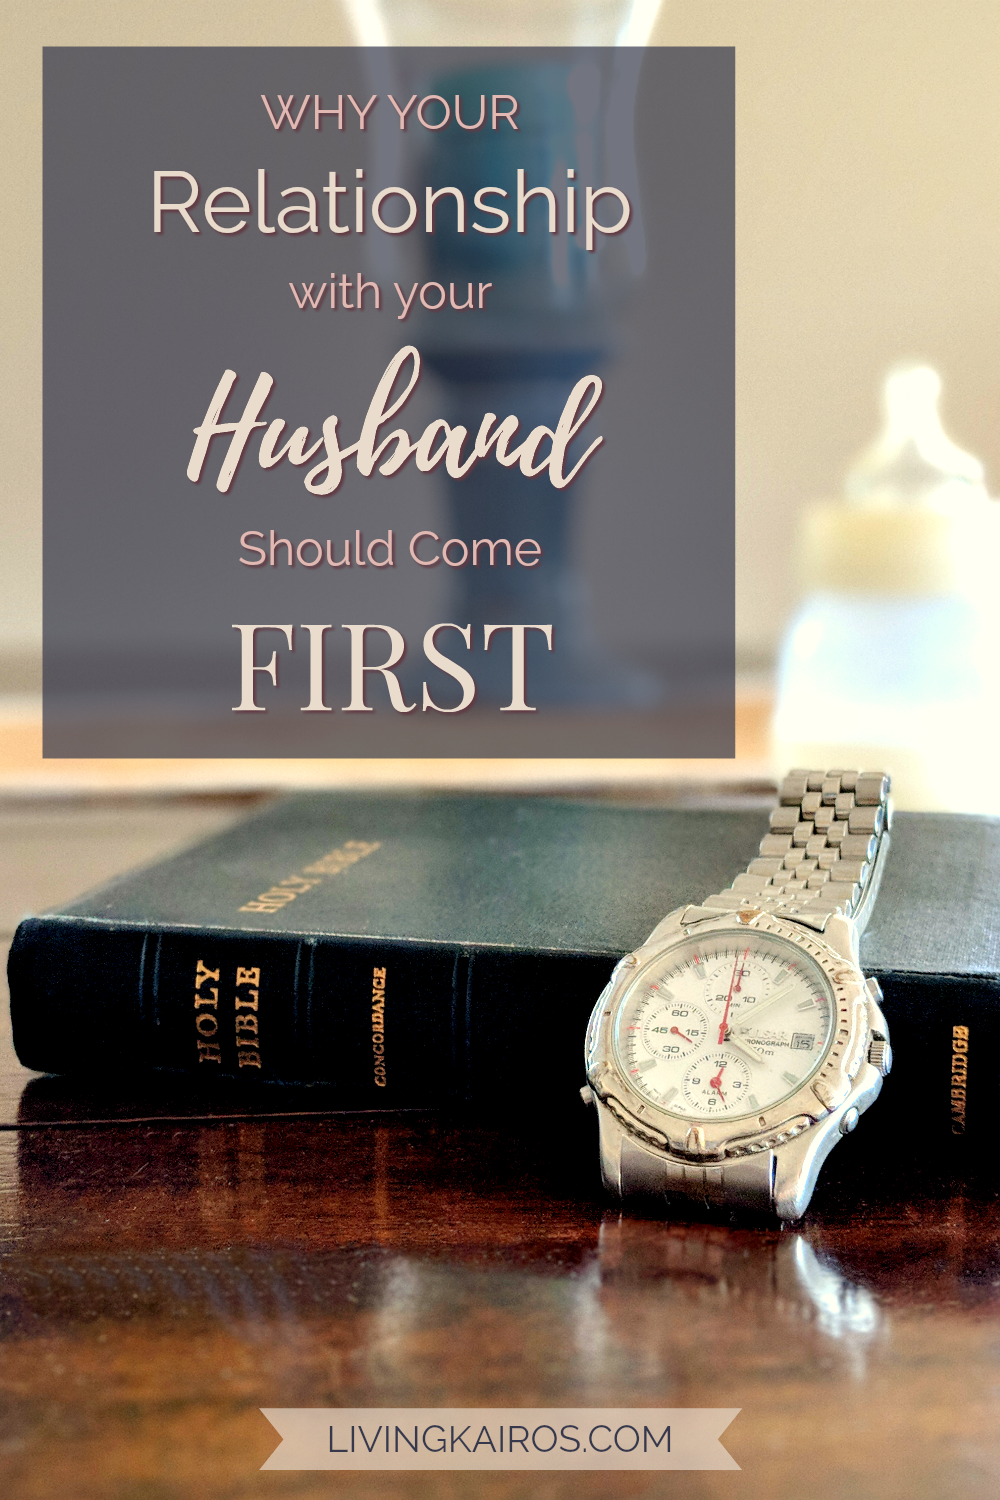 Putting your spouse first